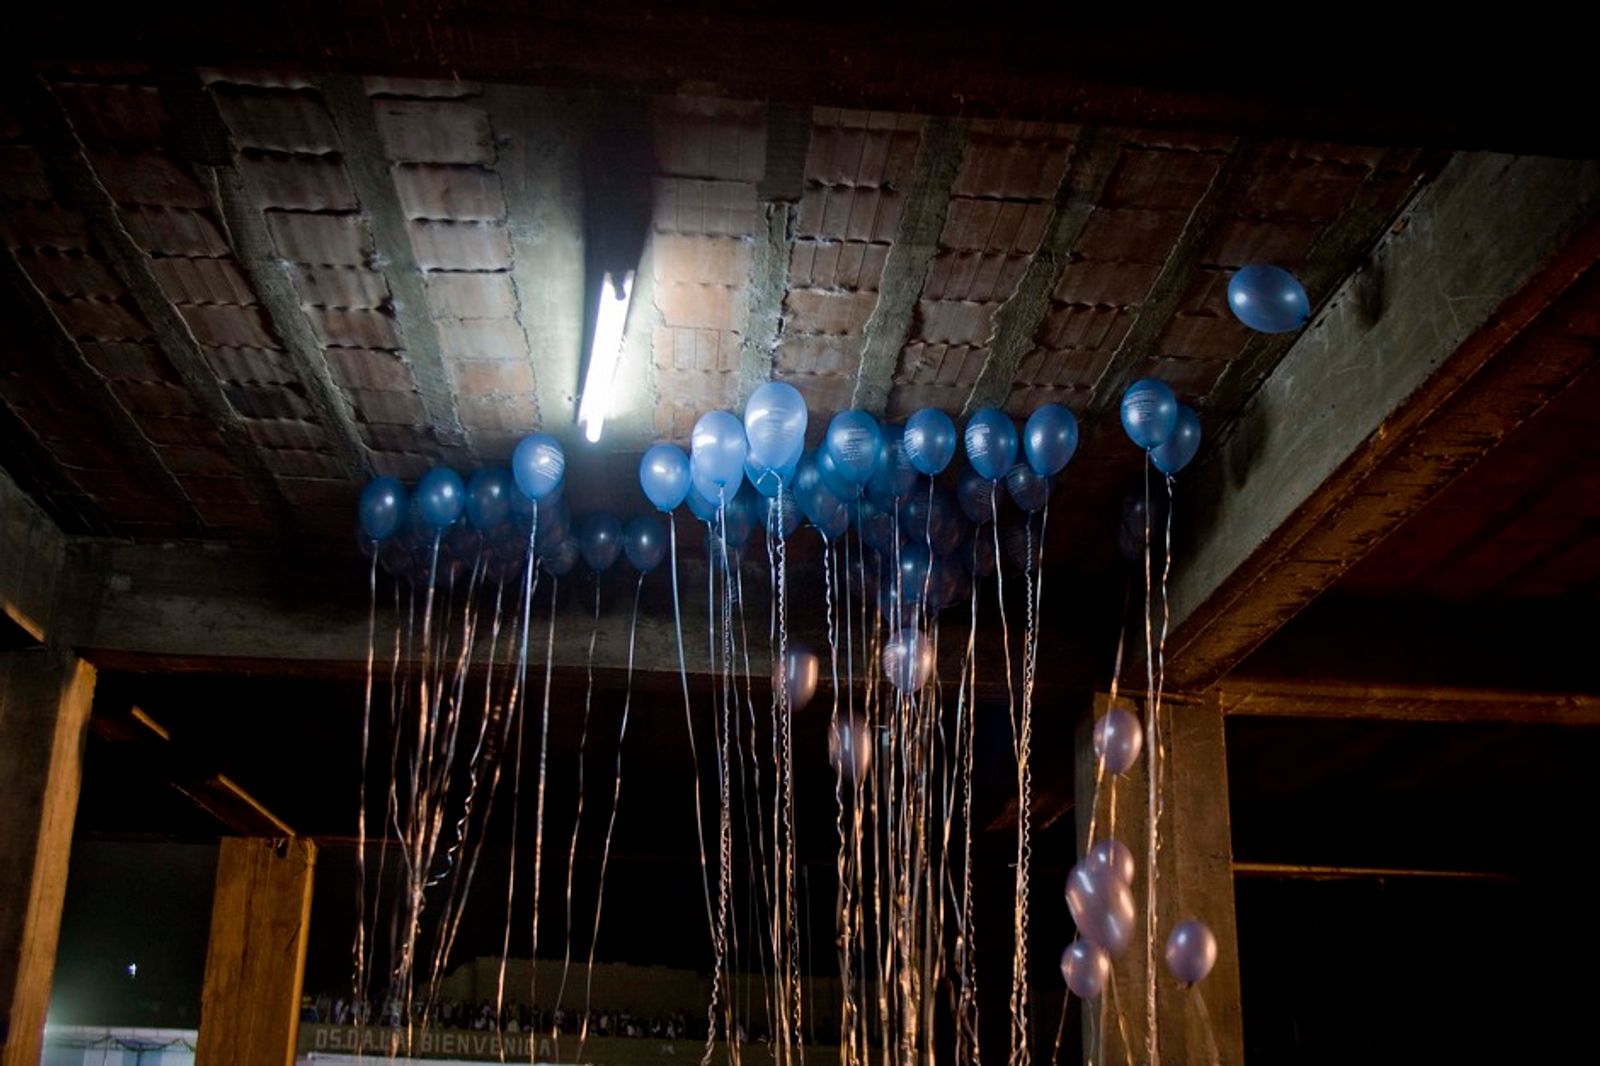 © Max Cabello Orcasitas - Balloons ornament rests during a religious ceremony anniversary conducted by members of a Pentecostal church.